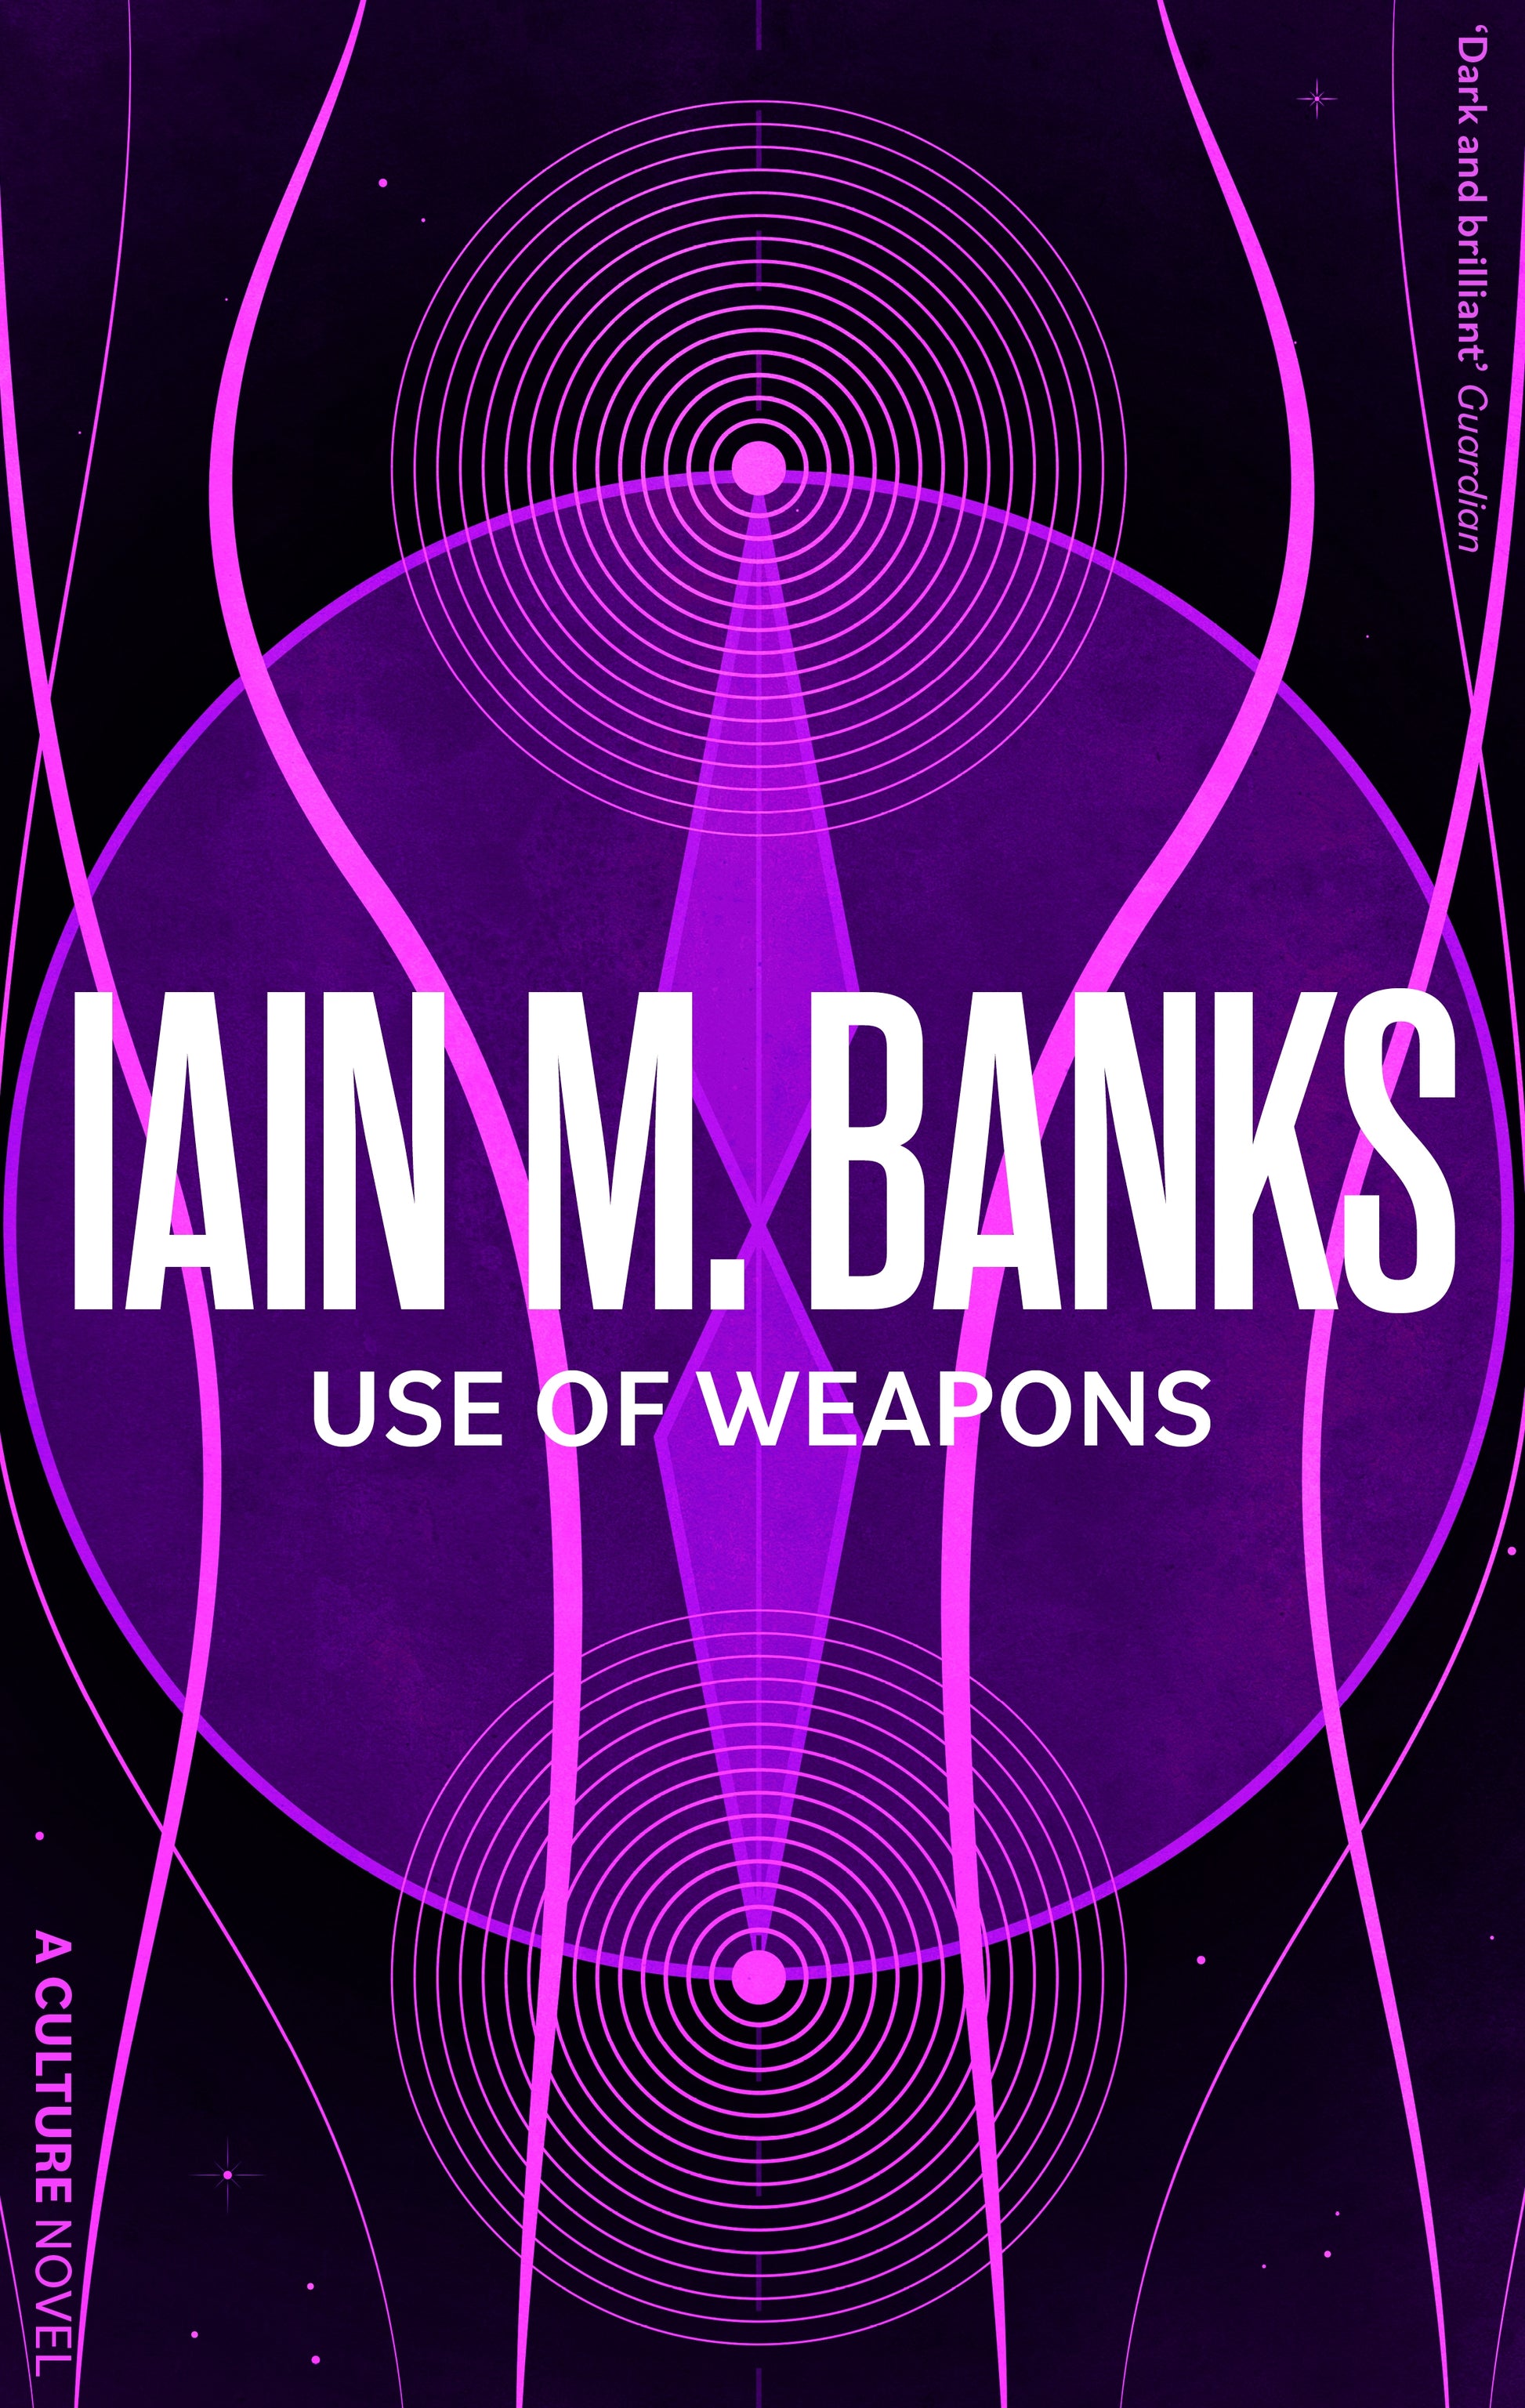 Use Of Weapons by Iain M. Banks